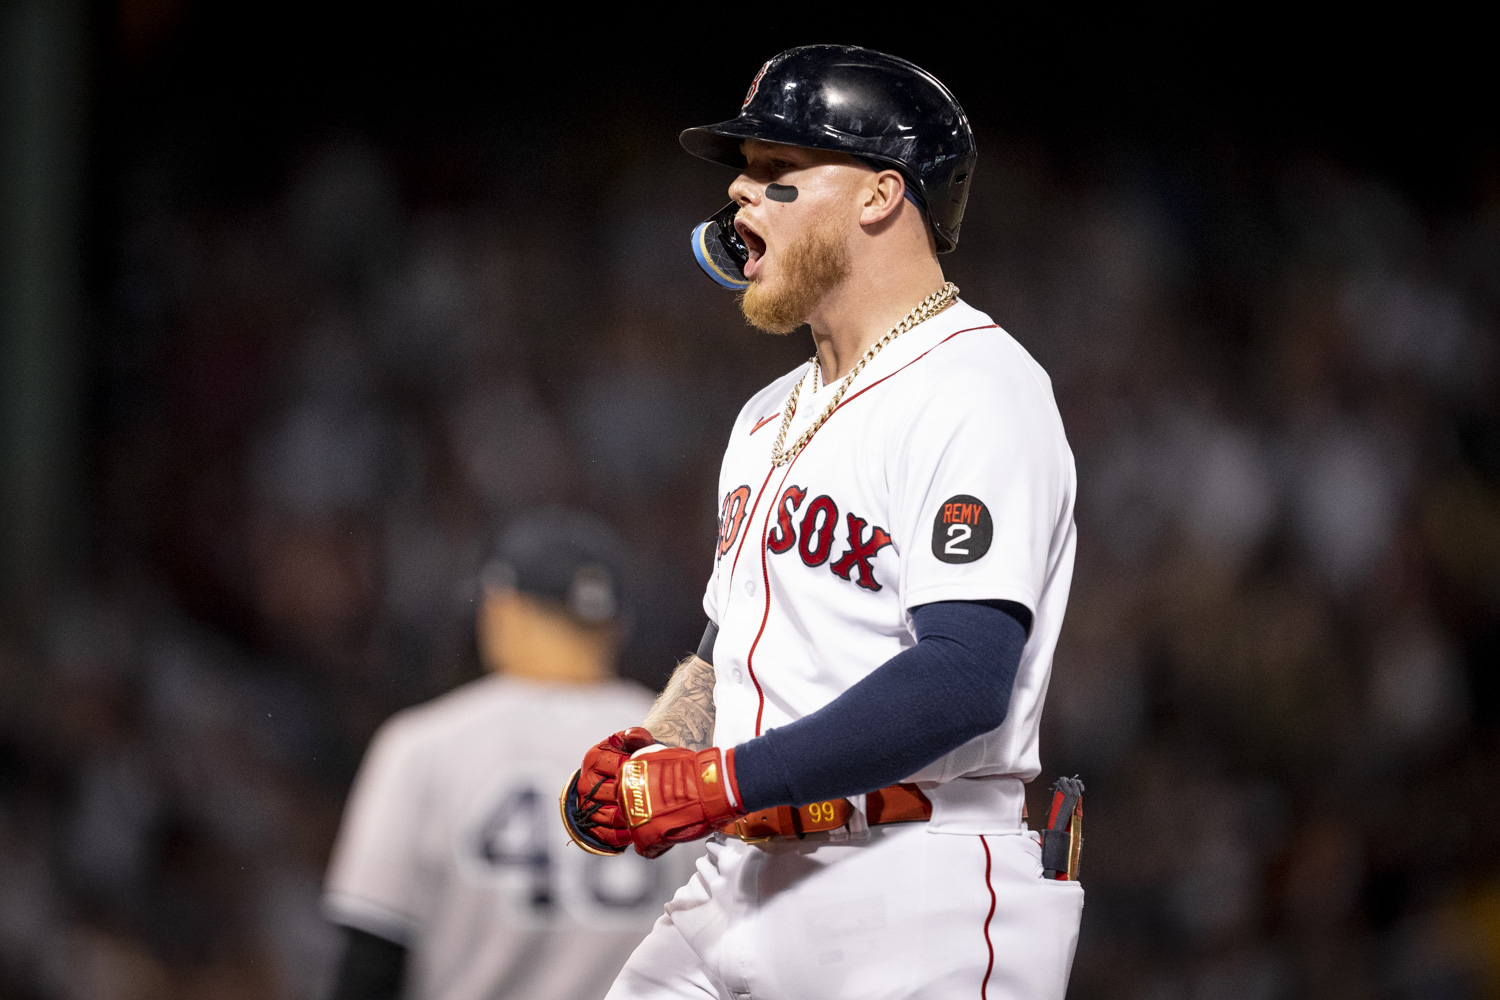 Alex Verdugo Hits Walk-Off Single For Red Sox in Comeback Win Over Yankees  - Fastball